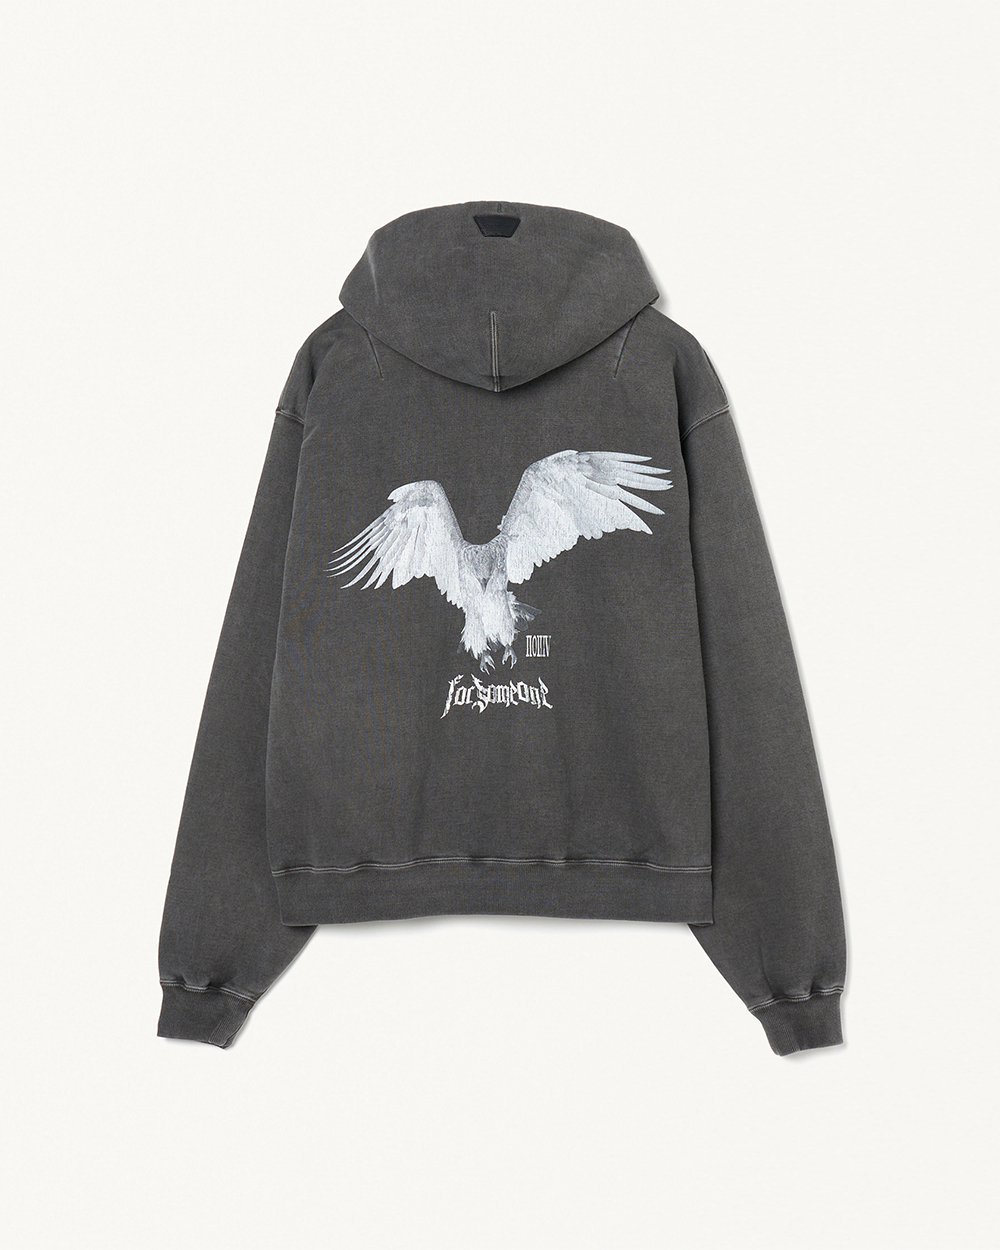 NY EAGLE ZIP HOODIE 詳細画像 Red 2